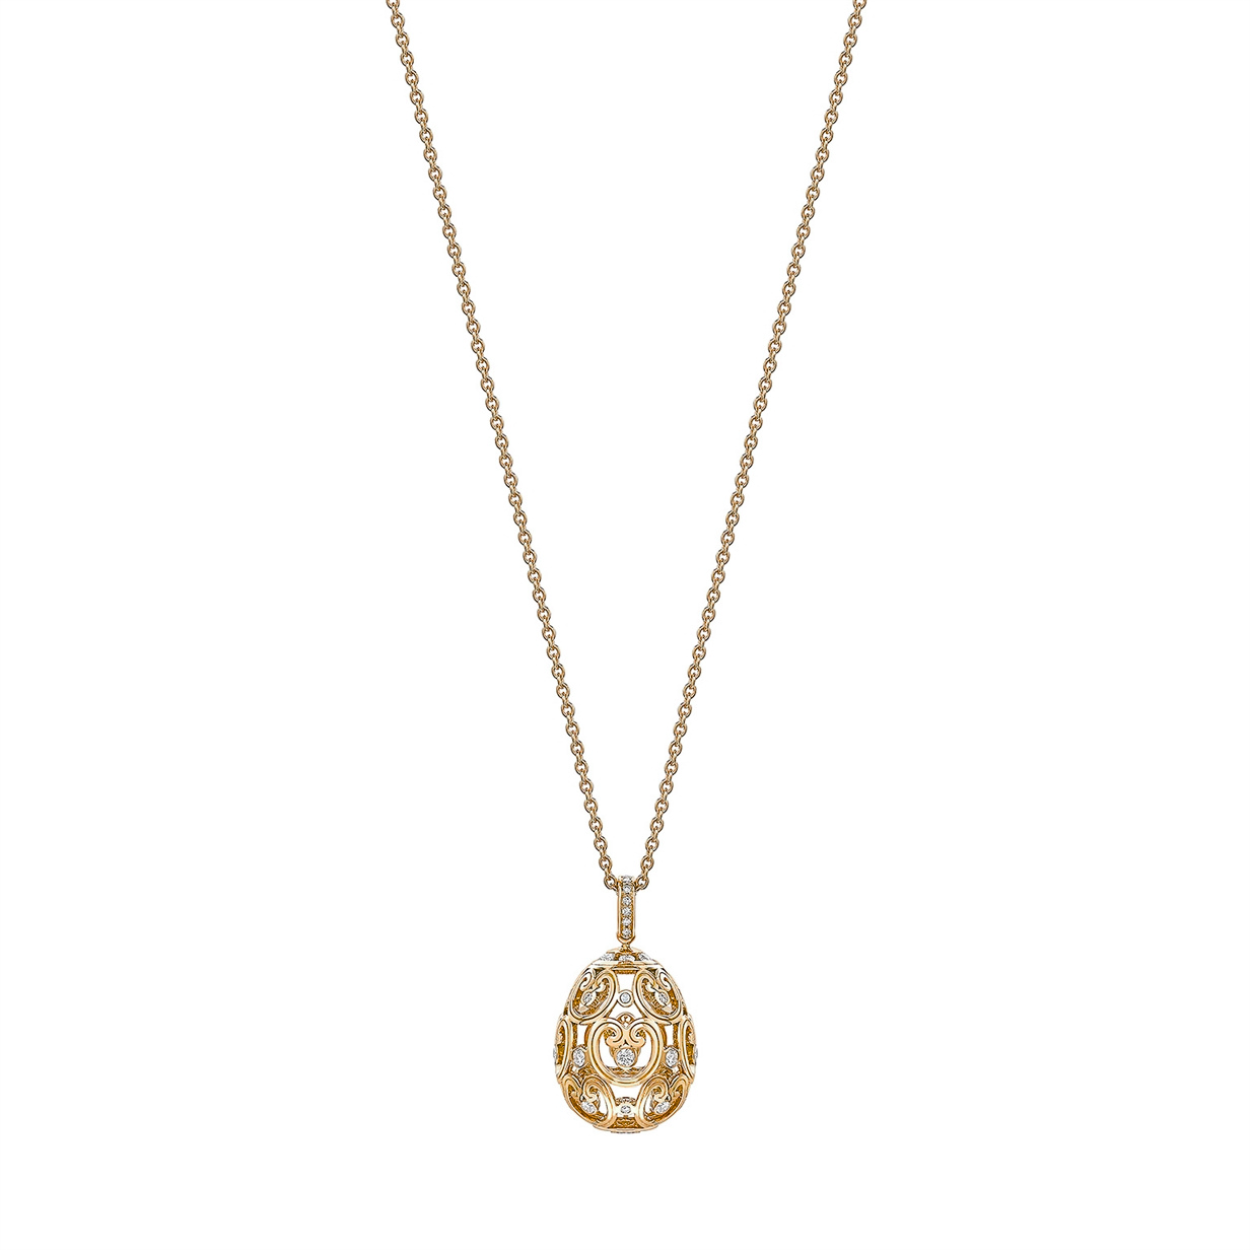 Fabergé Imperial Impératrice Yellow Gold & Diamond Egg Necklace